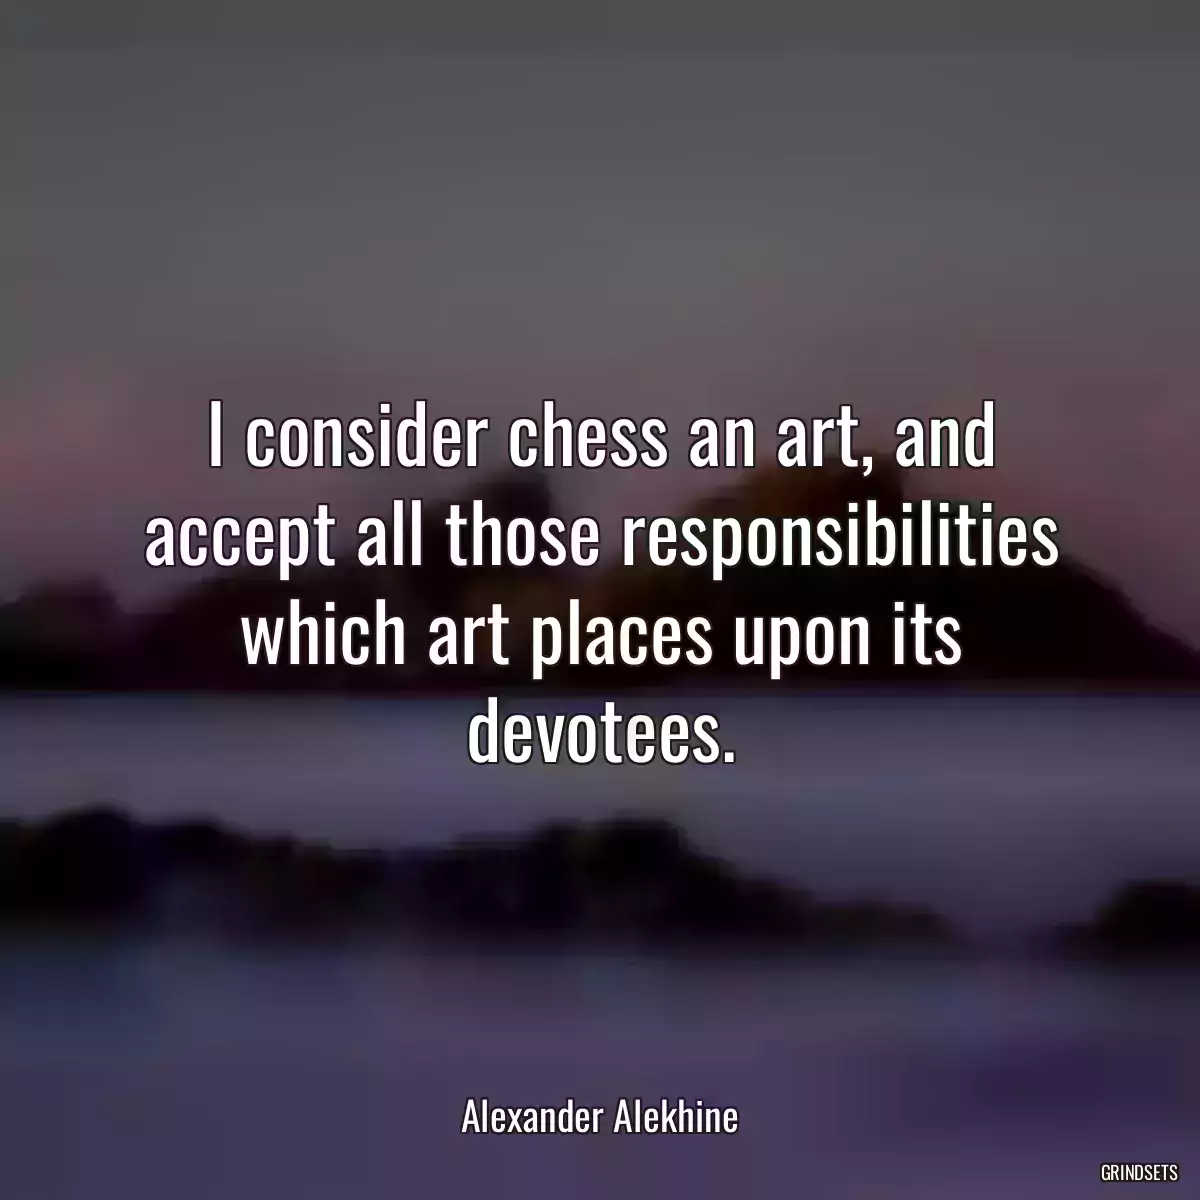 I consider chess an art, and accept all those responsibilities which art places upon its devotees.